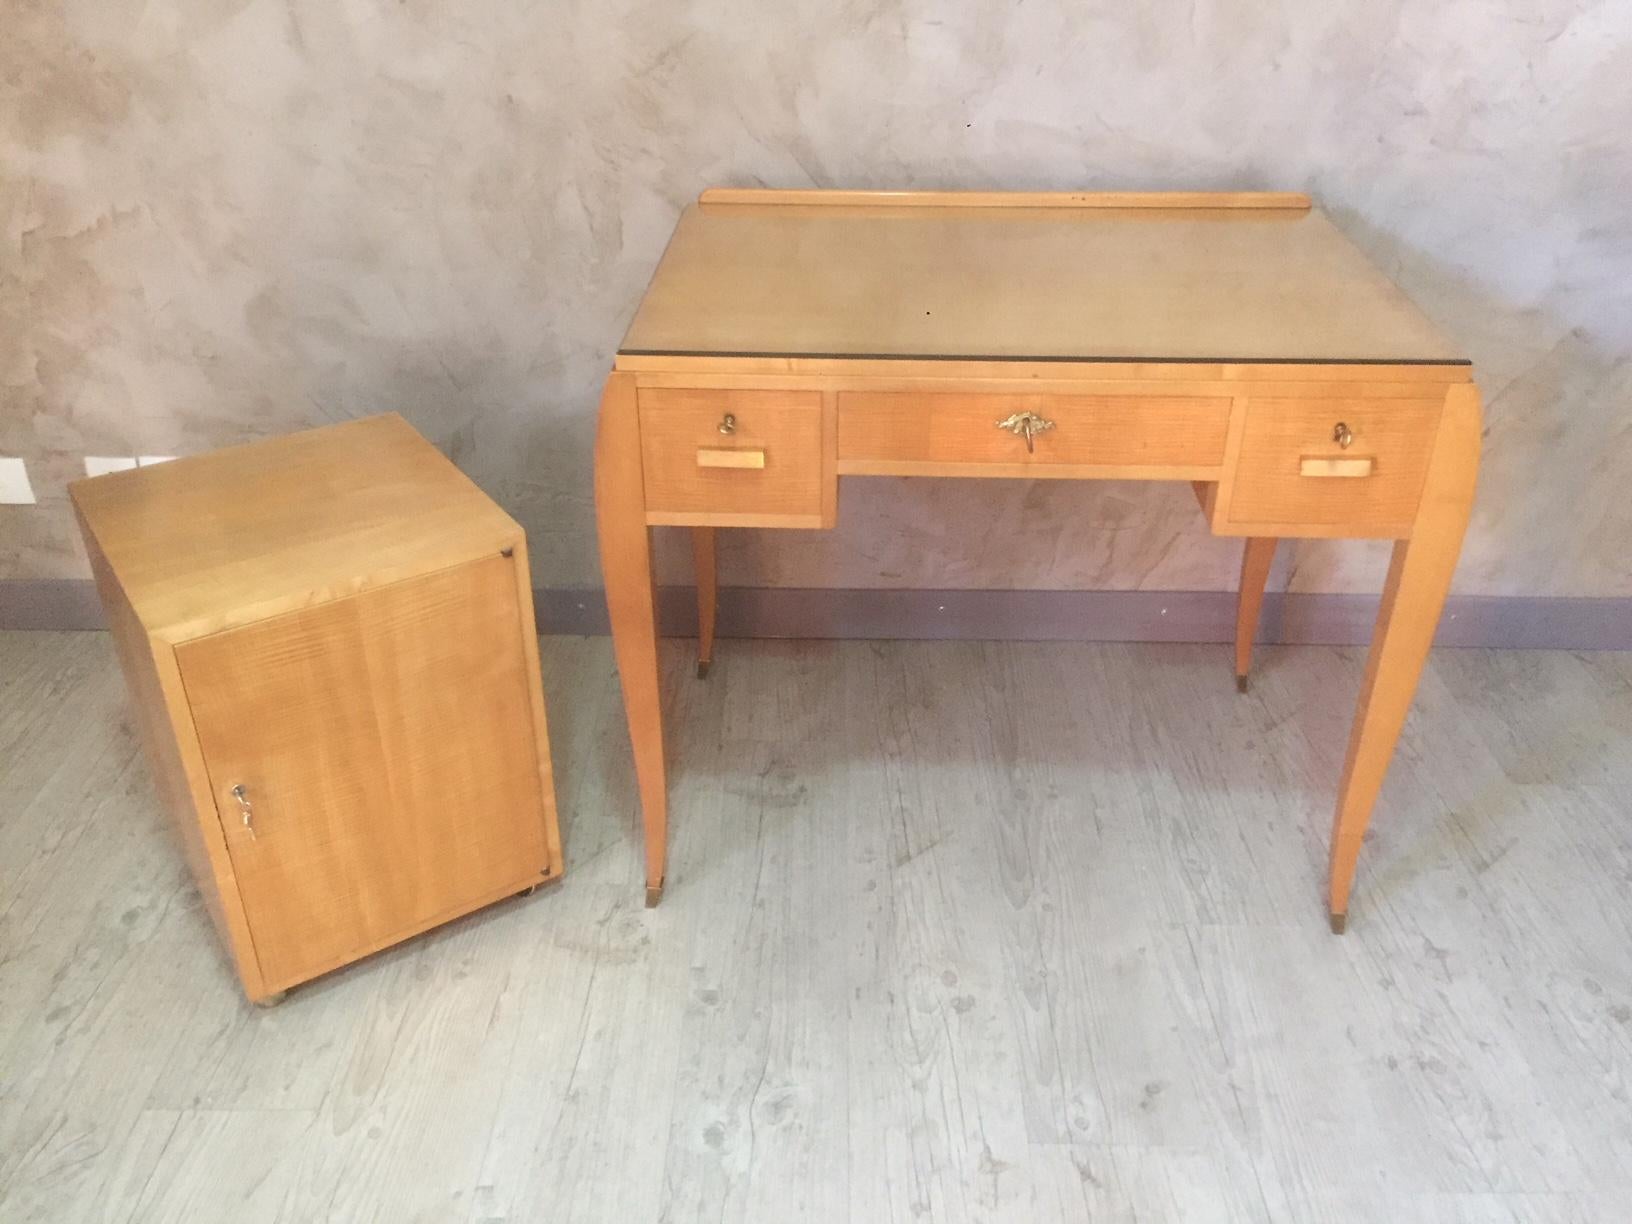 20th Century, French Desk with a Rolling Drawer, 1950s (Mitte des 20. Jahrhunderts)